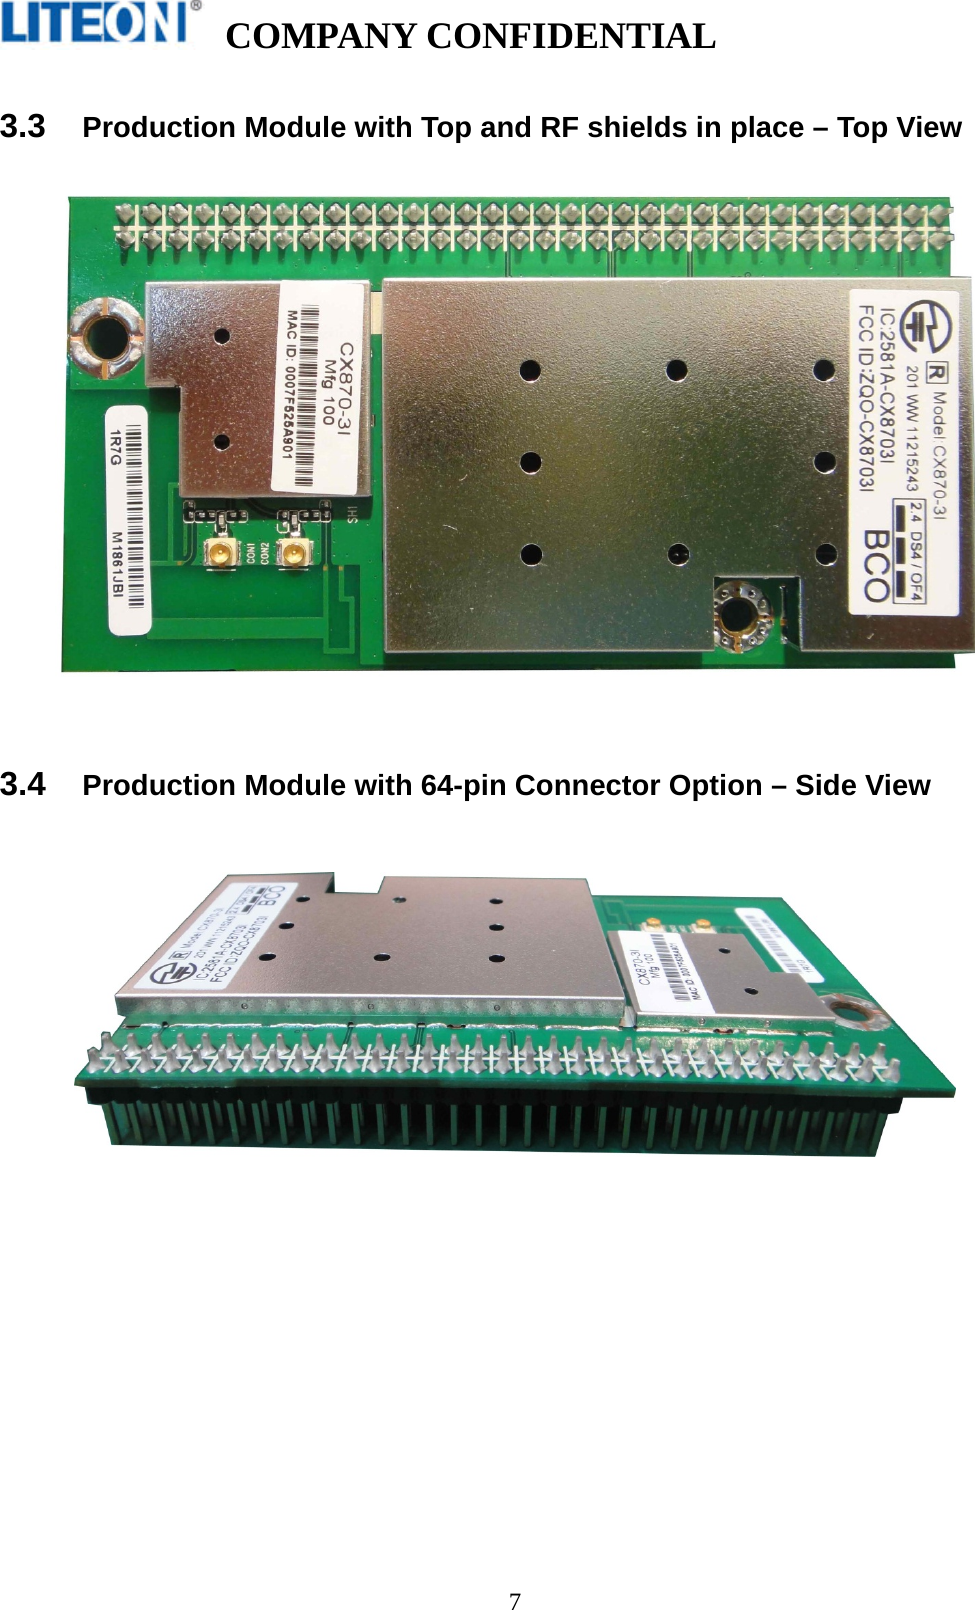   COMPANY CONFIDENTIAL    7 3.3  Production Module with Top and RF shields in place – Top View      3.4  Production Module with 64-pin Connector Option – Side View   